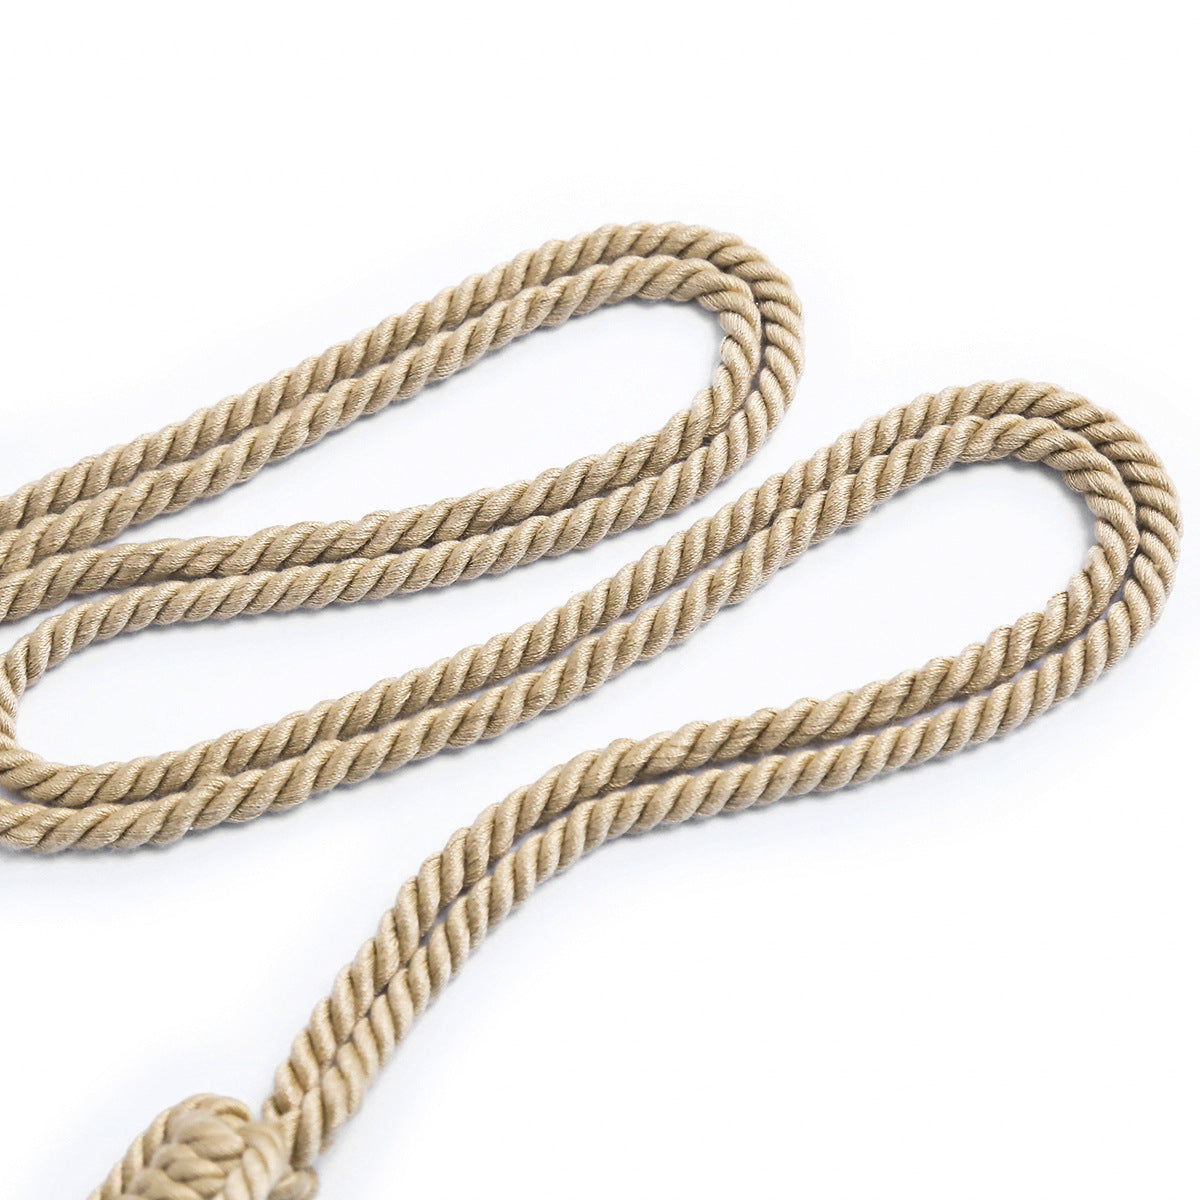 Collar Bundled With Cotton And Hemp Rope Performance Props